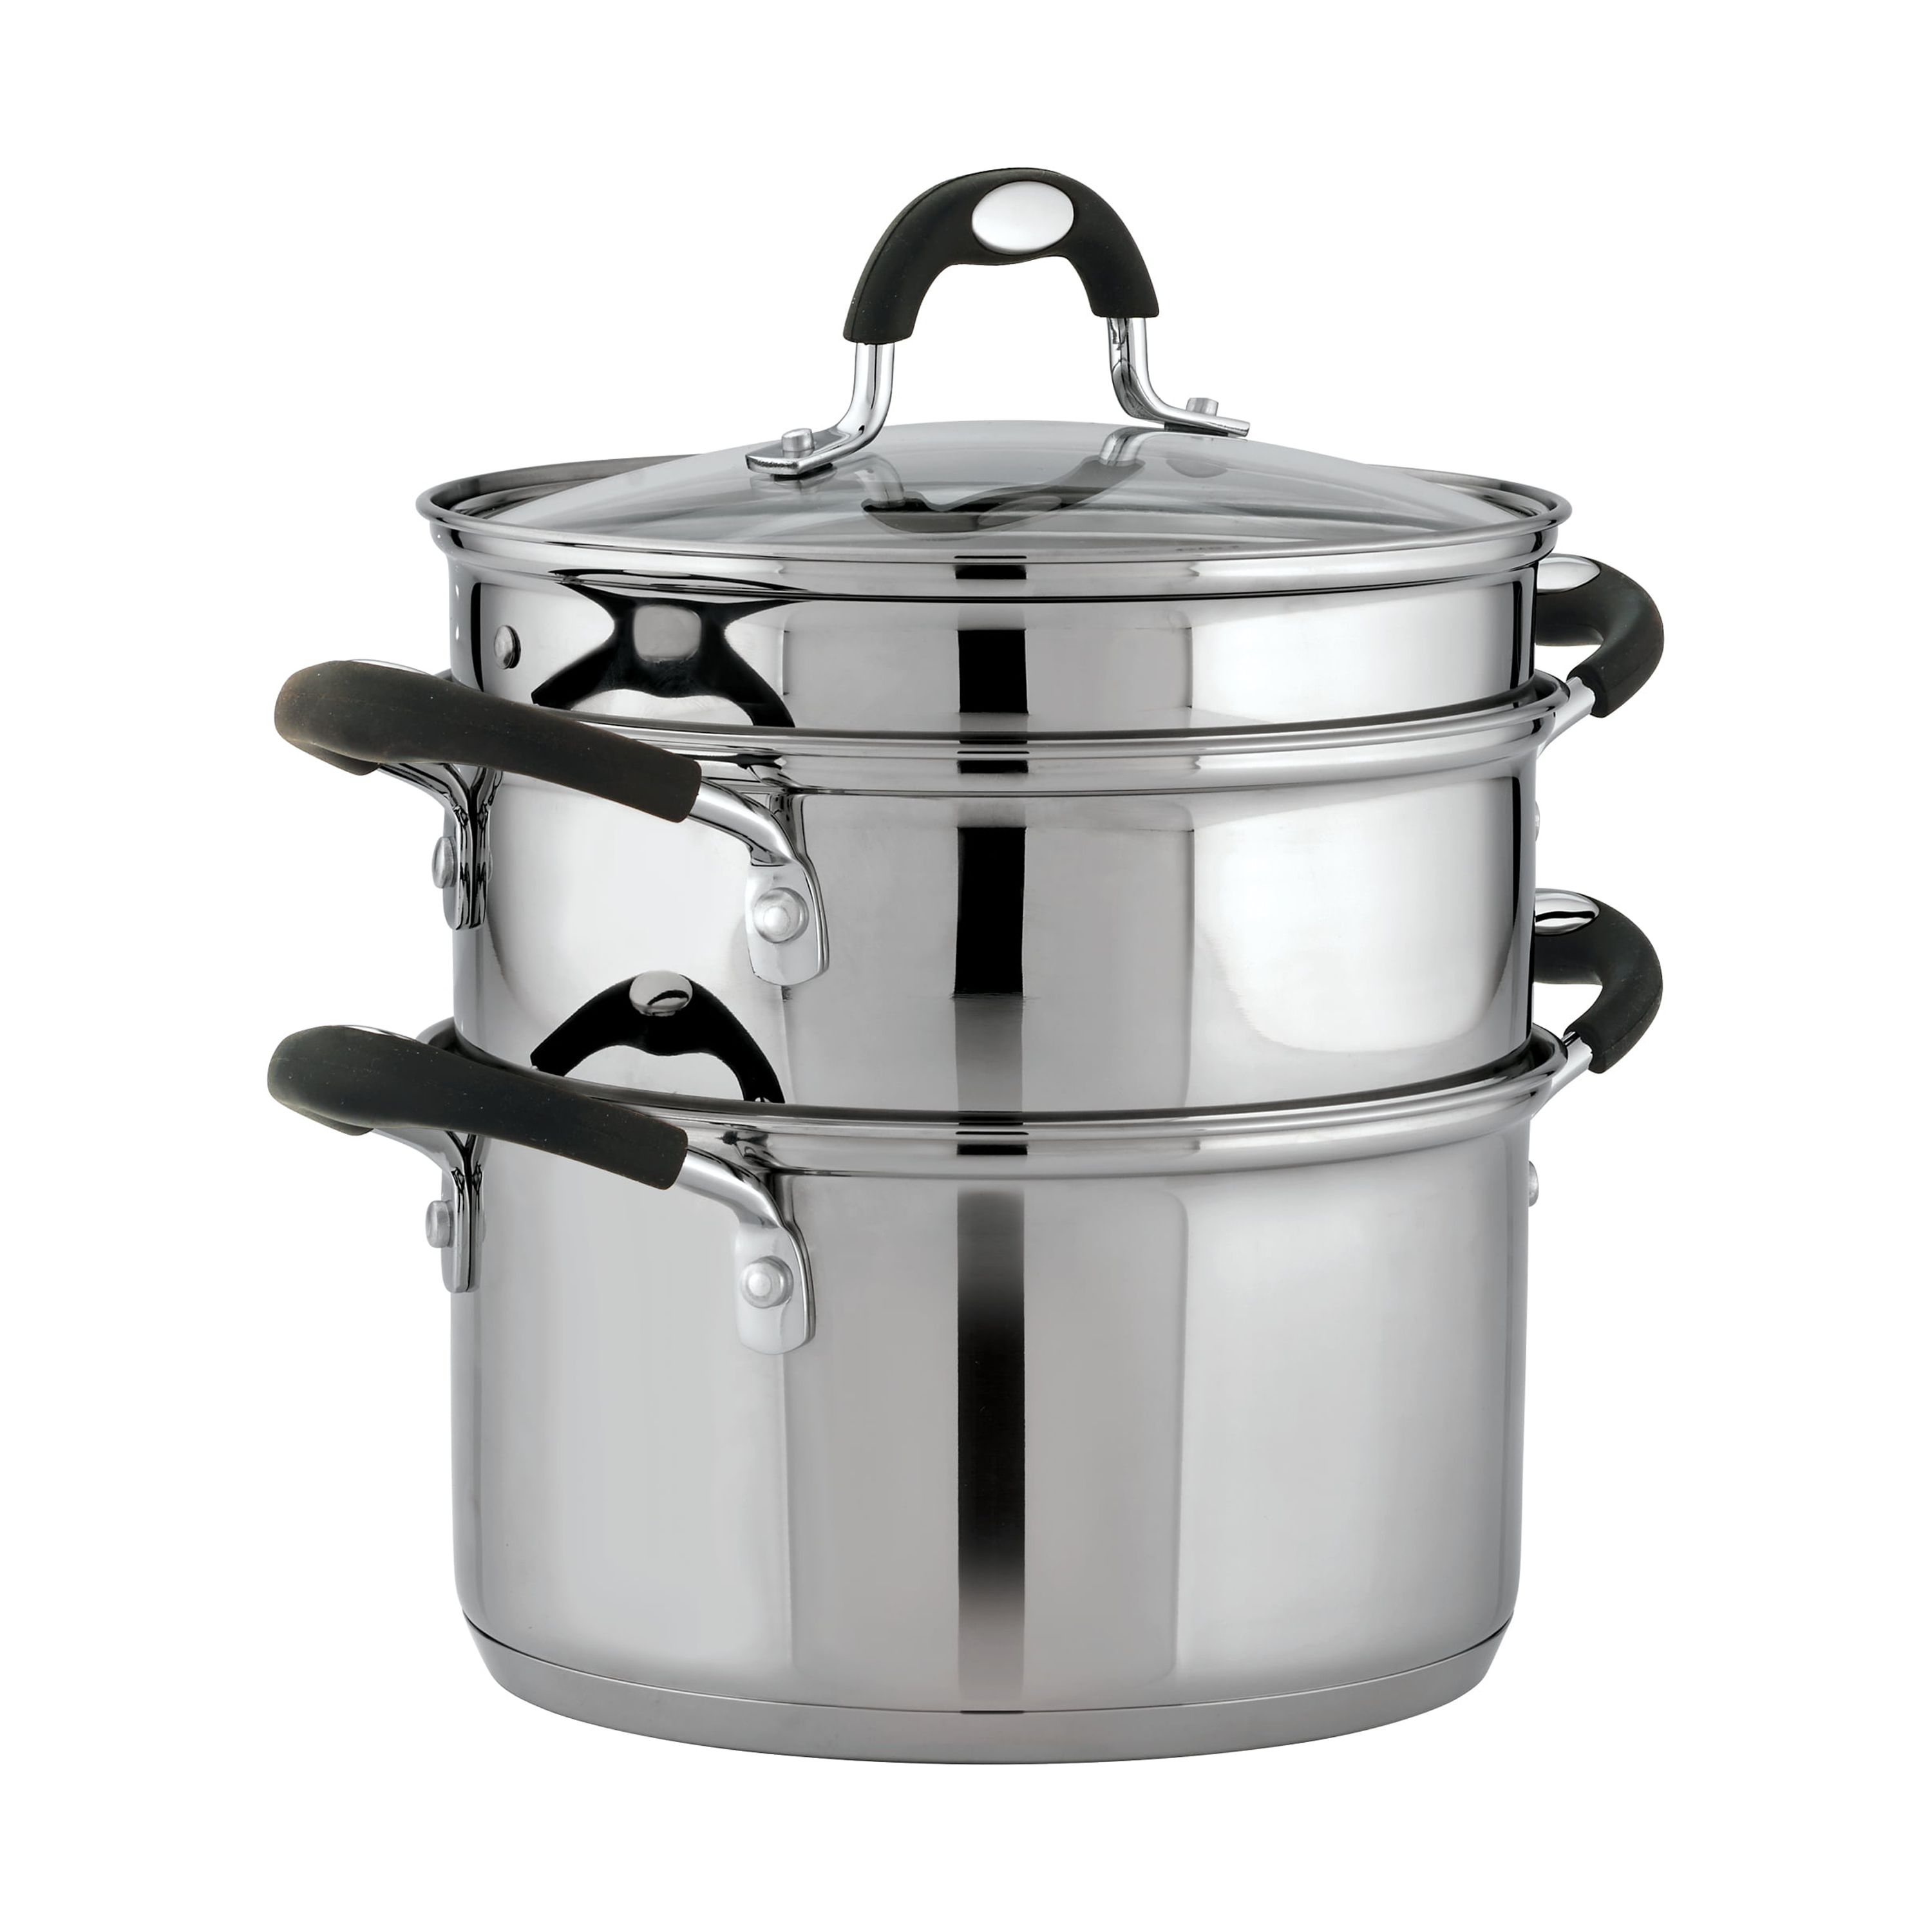 Tramontina Stainless Steel 3 Quart Steamer & Double-Boiler, 4 Piece - image 3 of 11